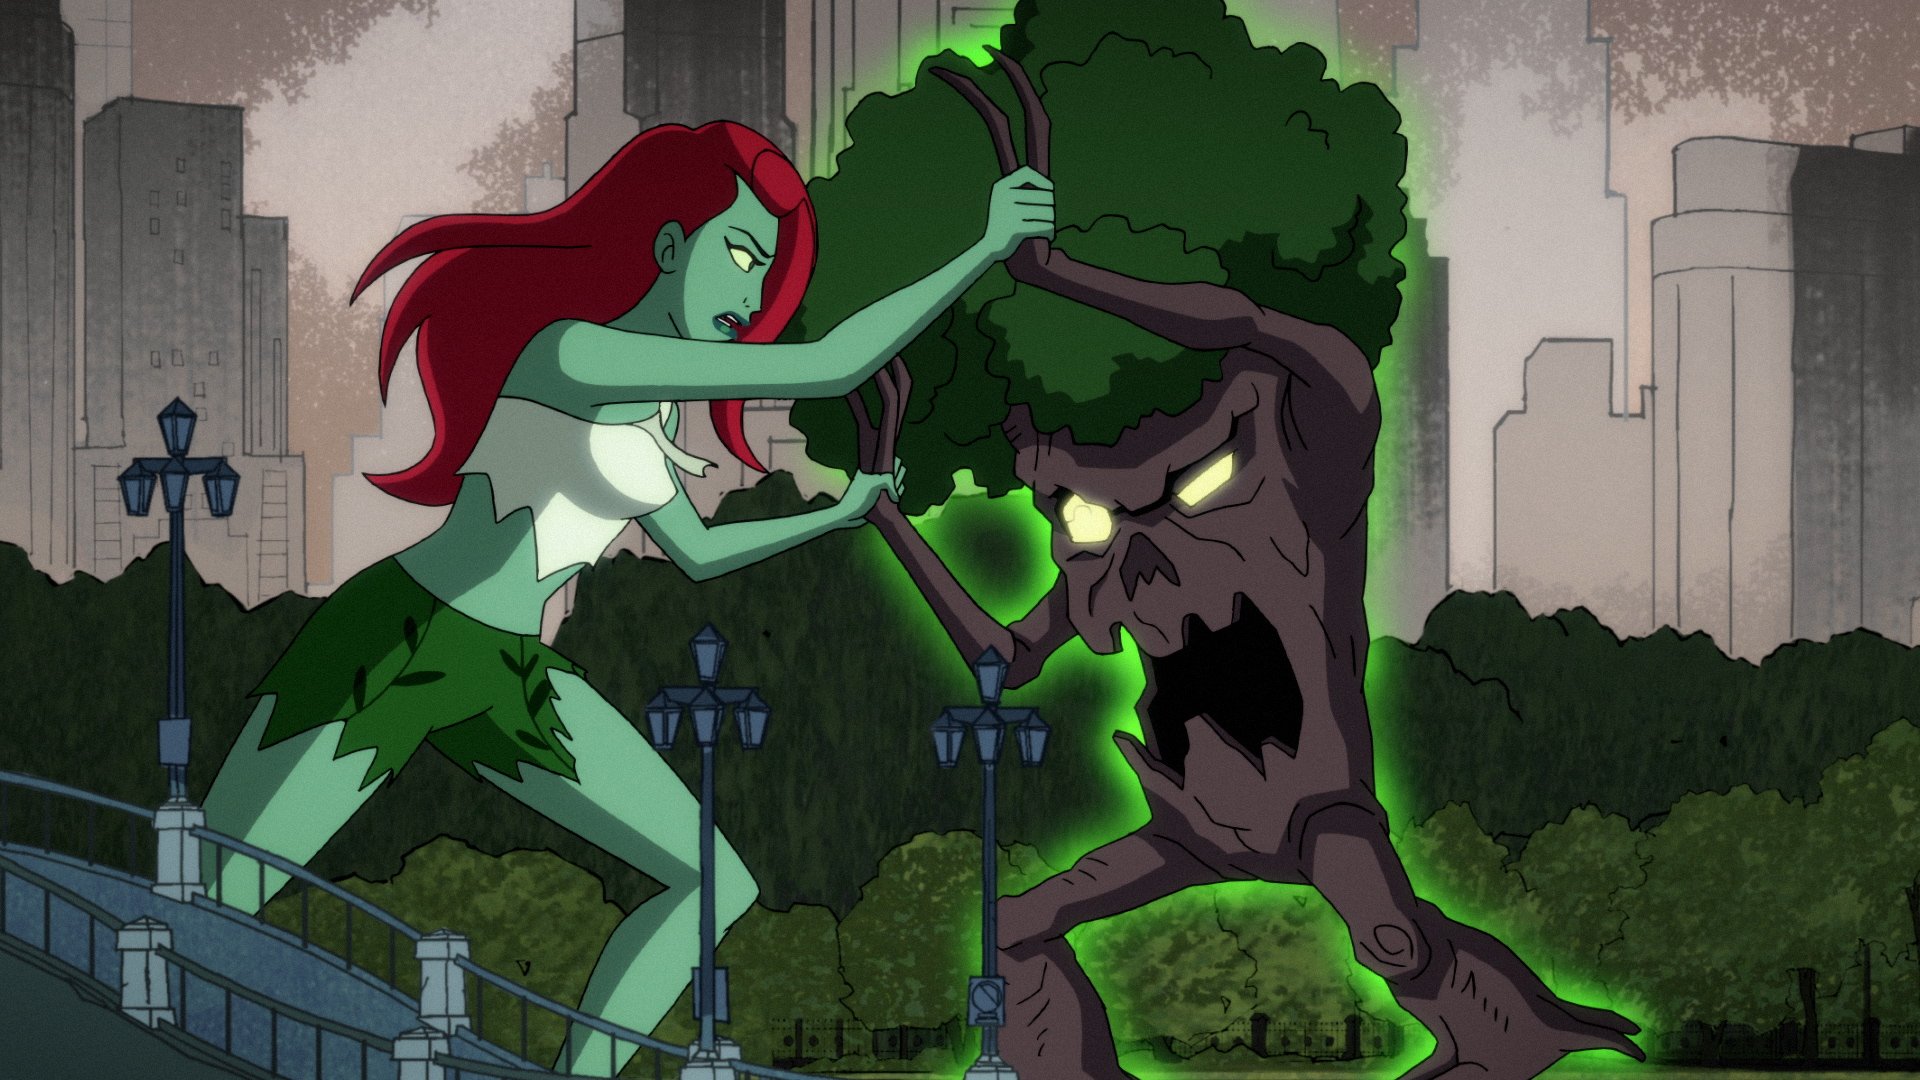 Poison Ivy (voiced by Lake Bell) fights off an infected tree in 'Harley Quinn' Season 1.